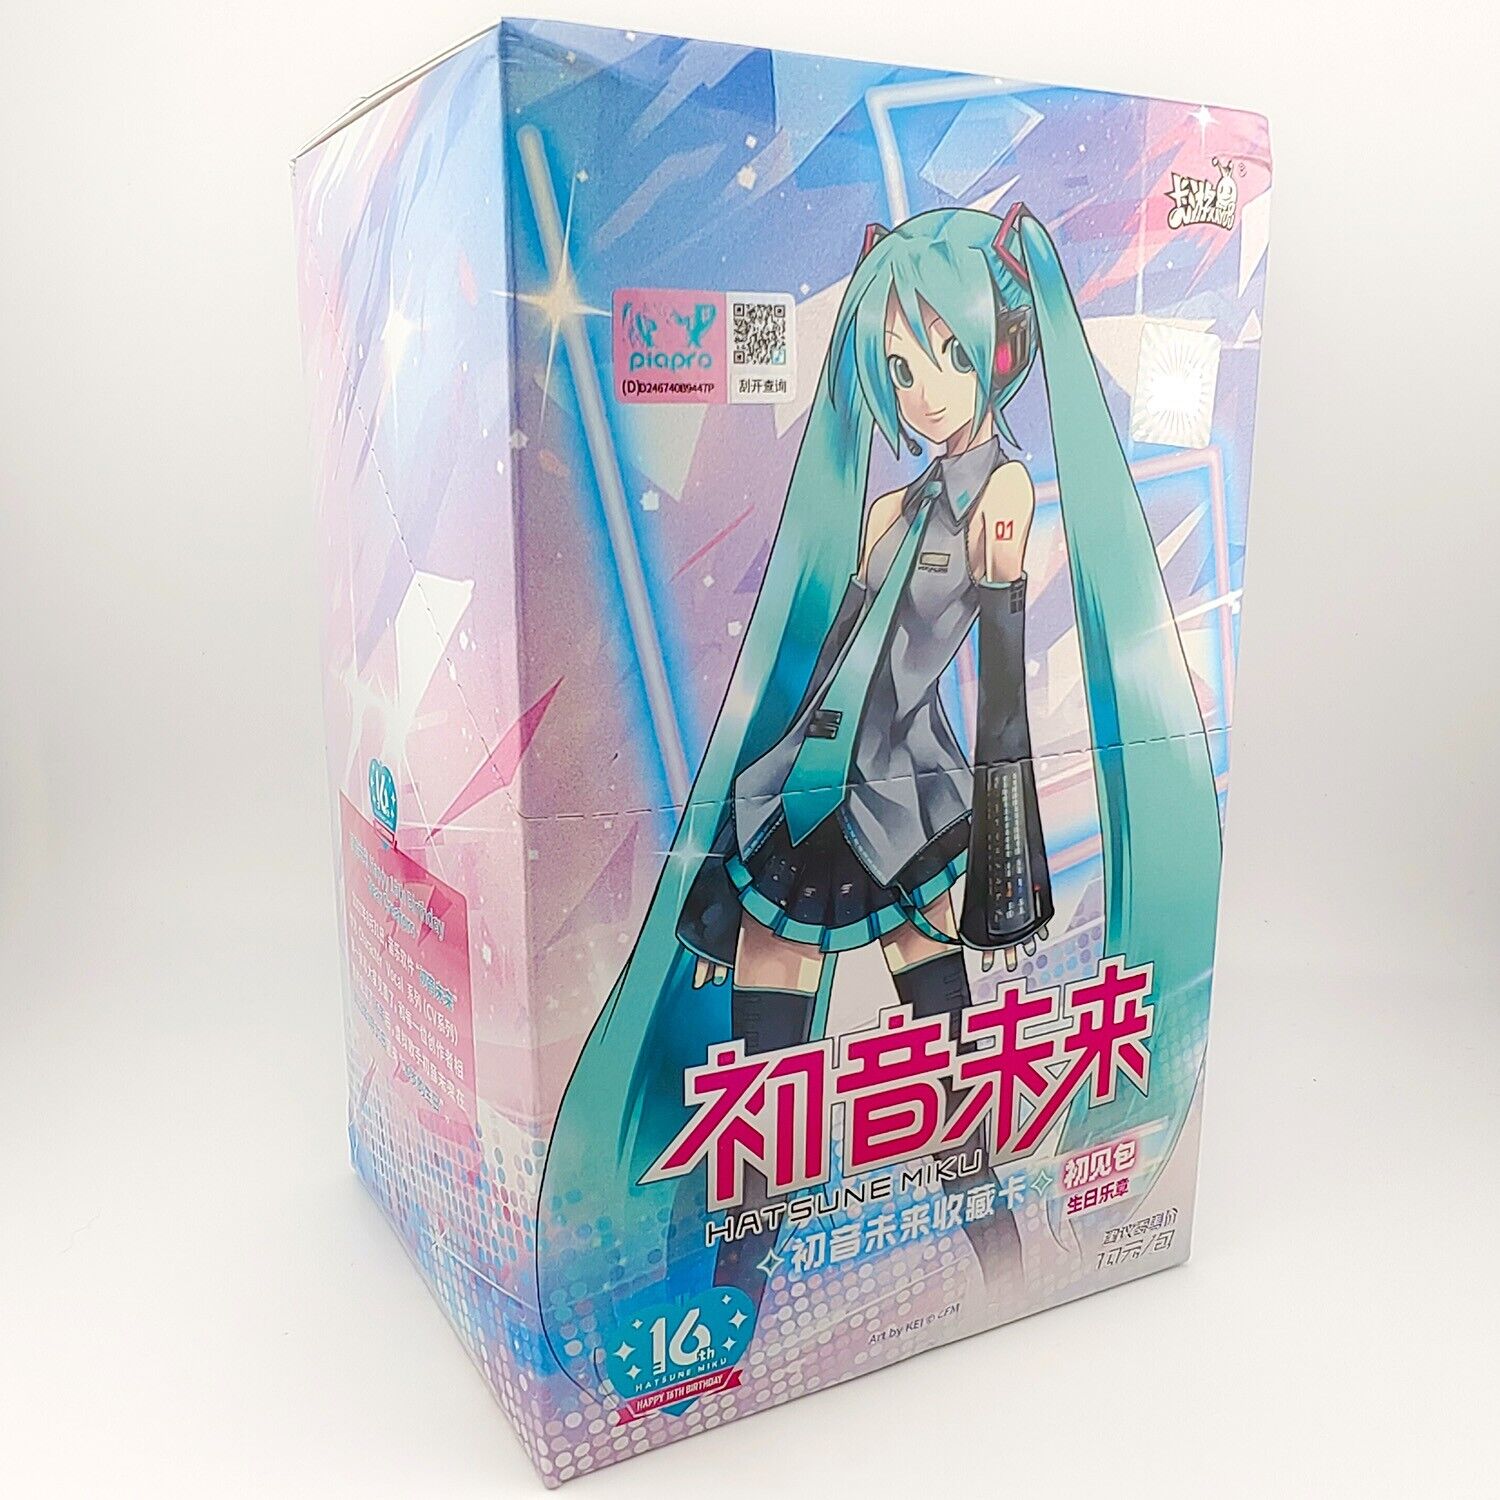 New Official Hatsune Miku Kayou Trading Card Booster Box 18 packs Anime Doujin